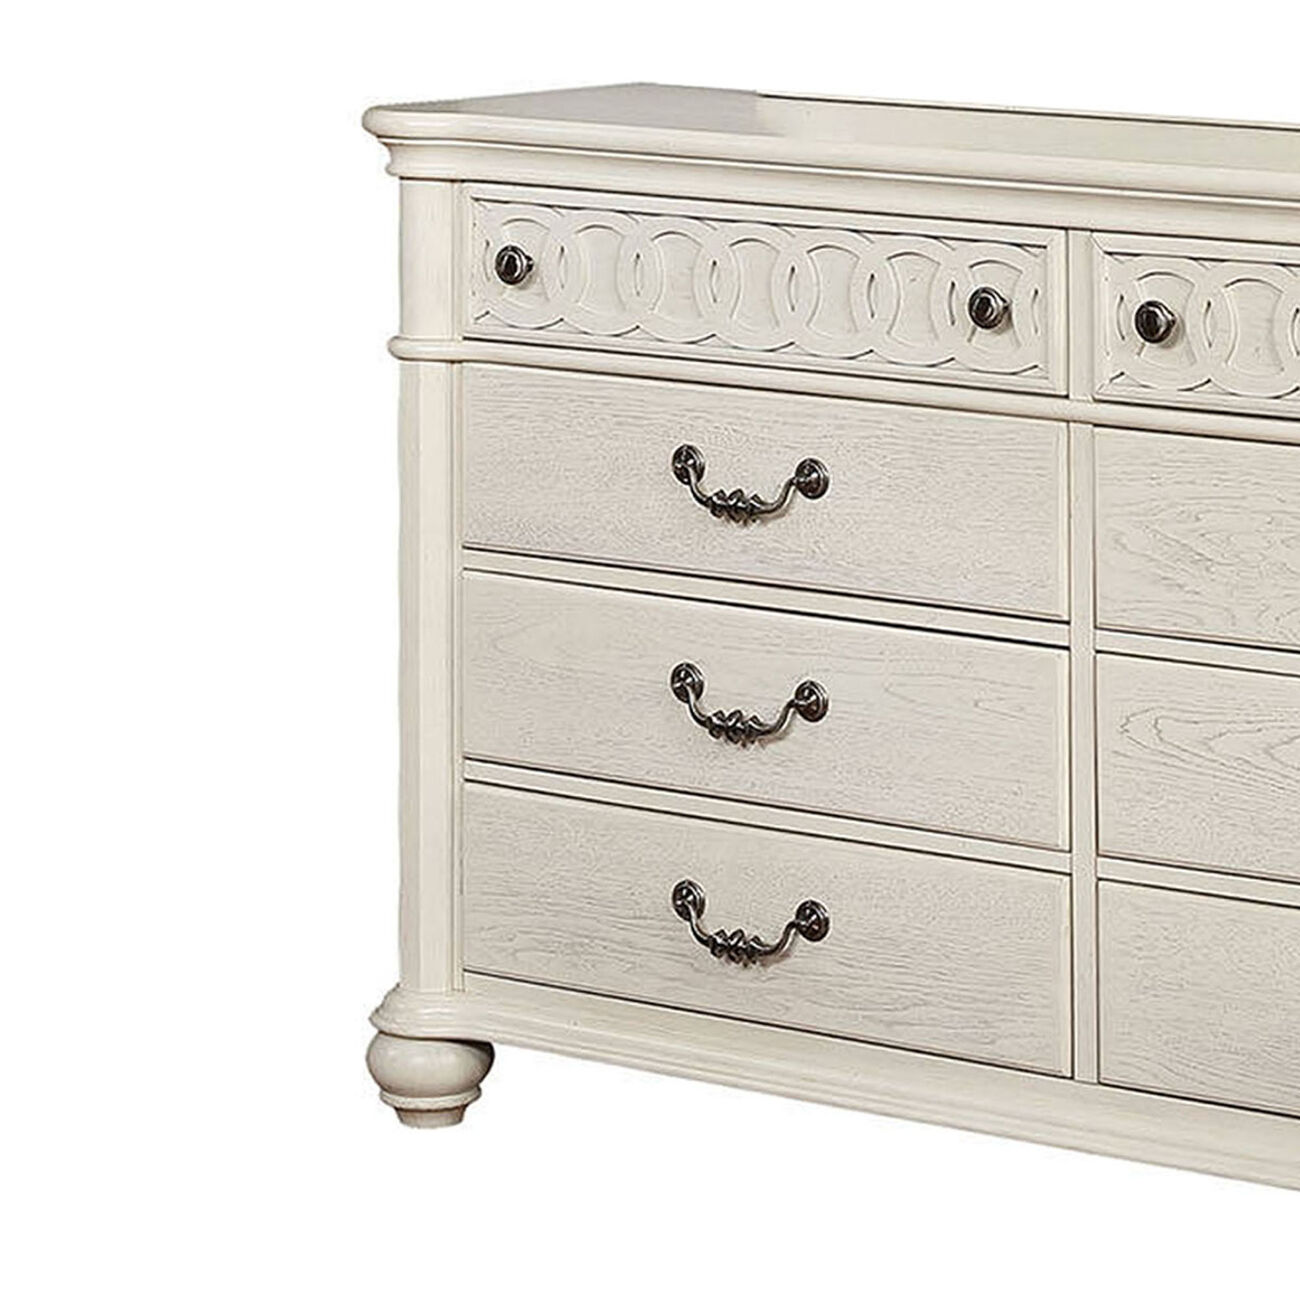 Wooden 8 Drawers Dresser with Turned Legs and Metal Pulls, White